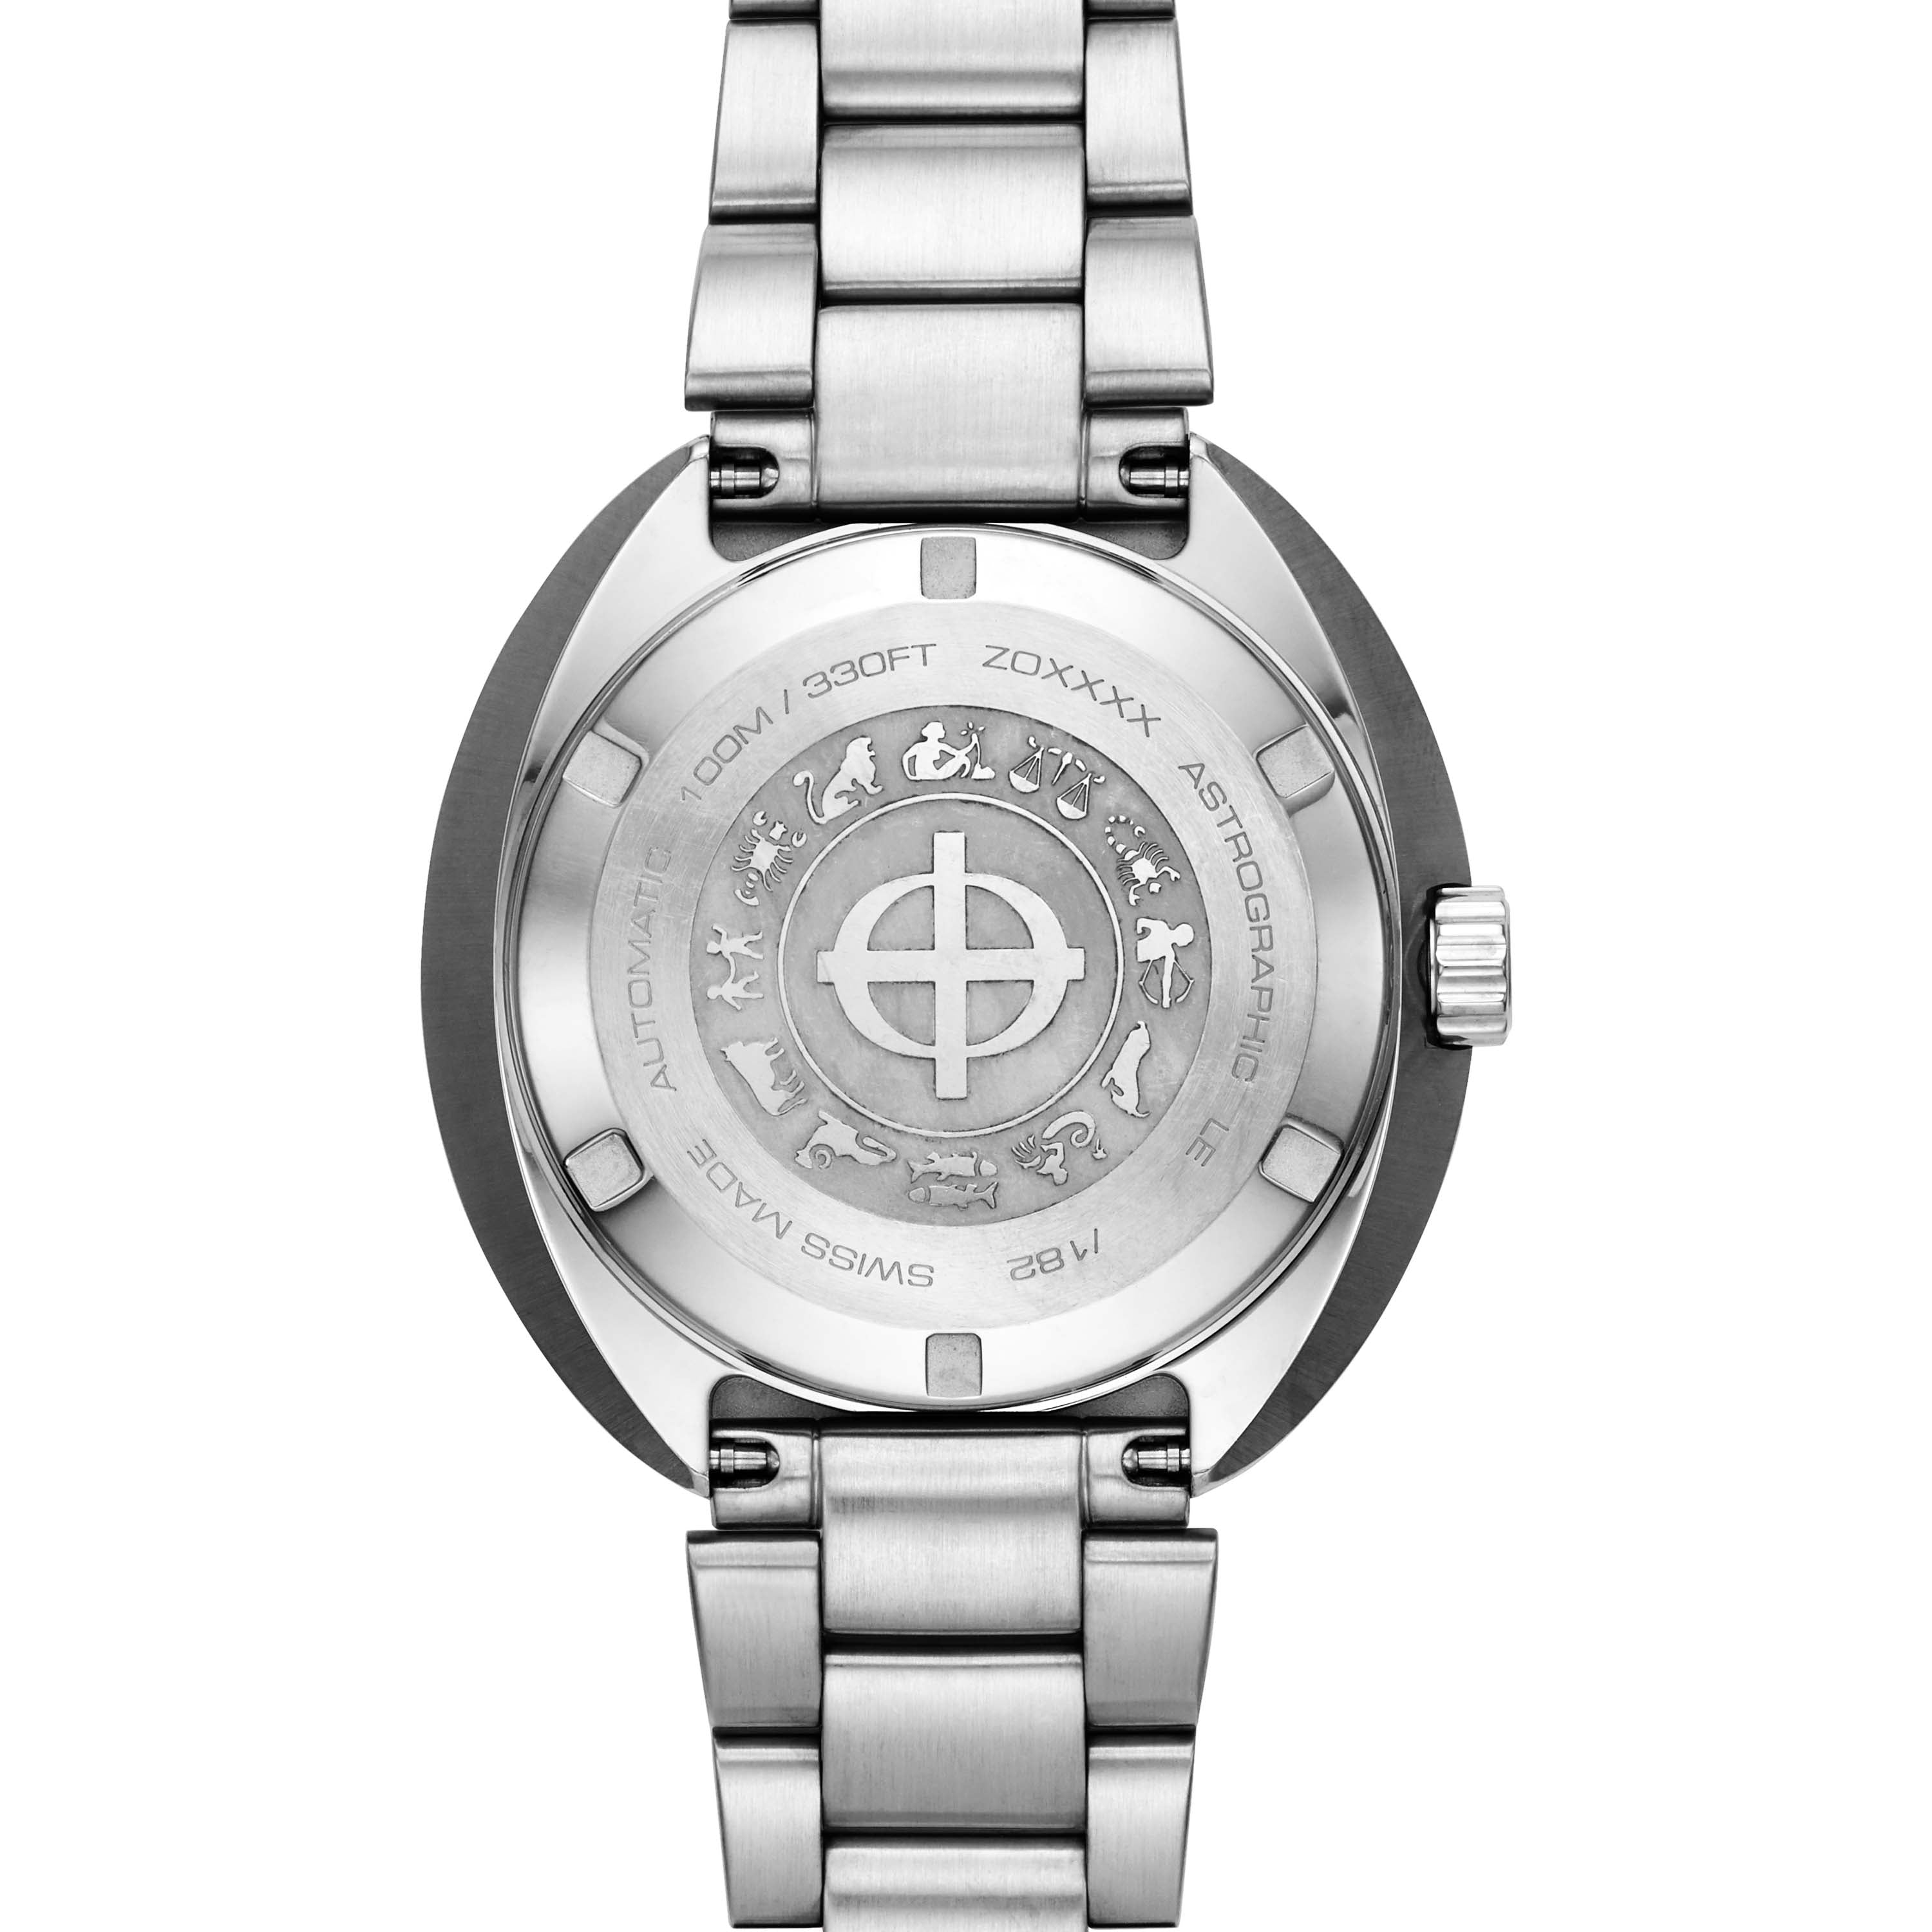 LIMITED EDITION ASTROGRAPHIC AUTOMATIC STAINLESS STEEL WATCH – Zodiac ...